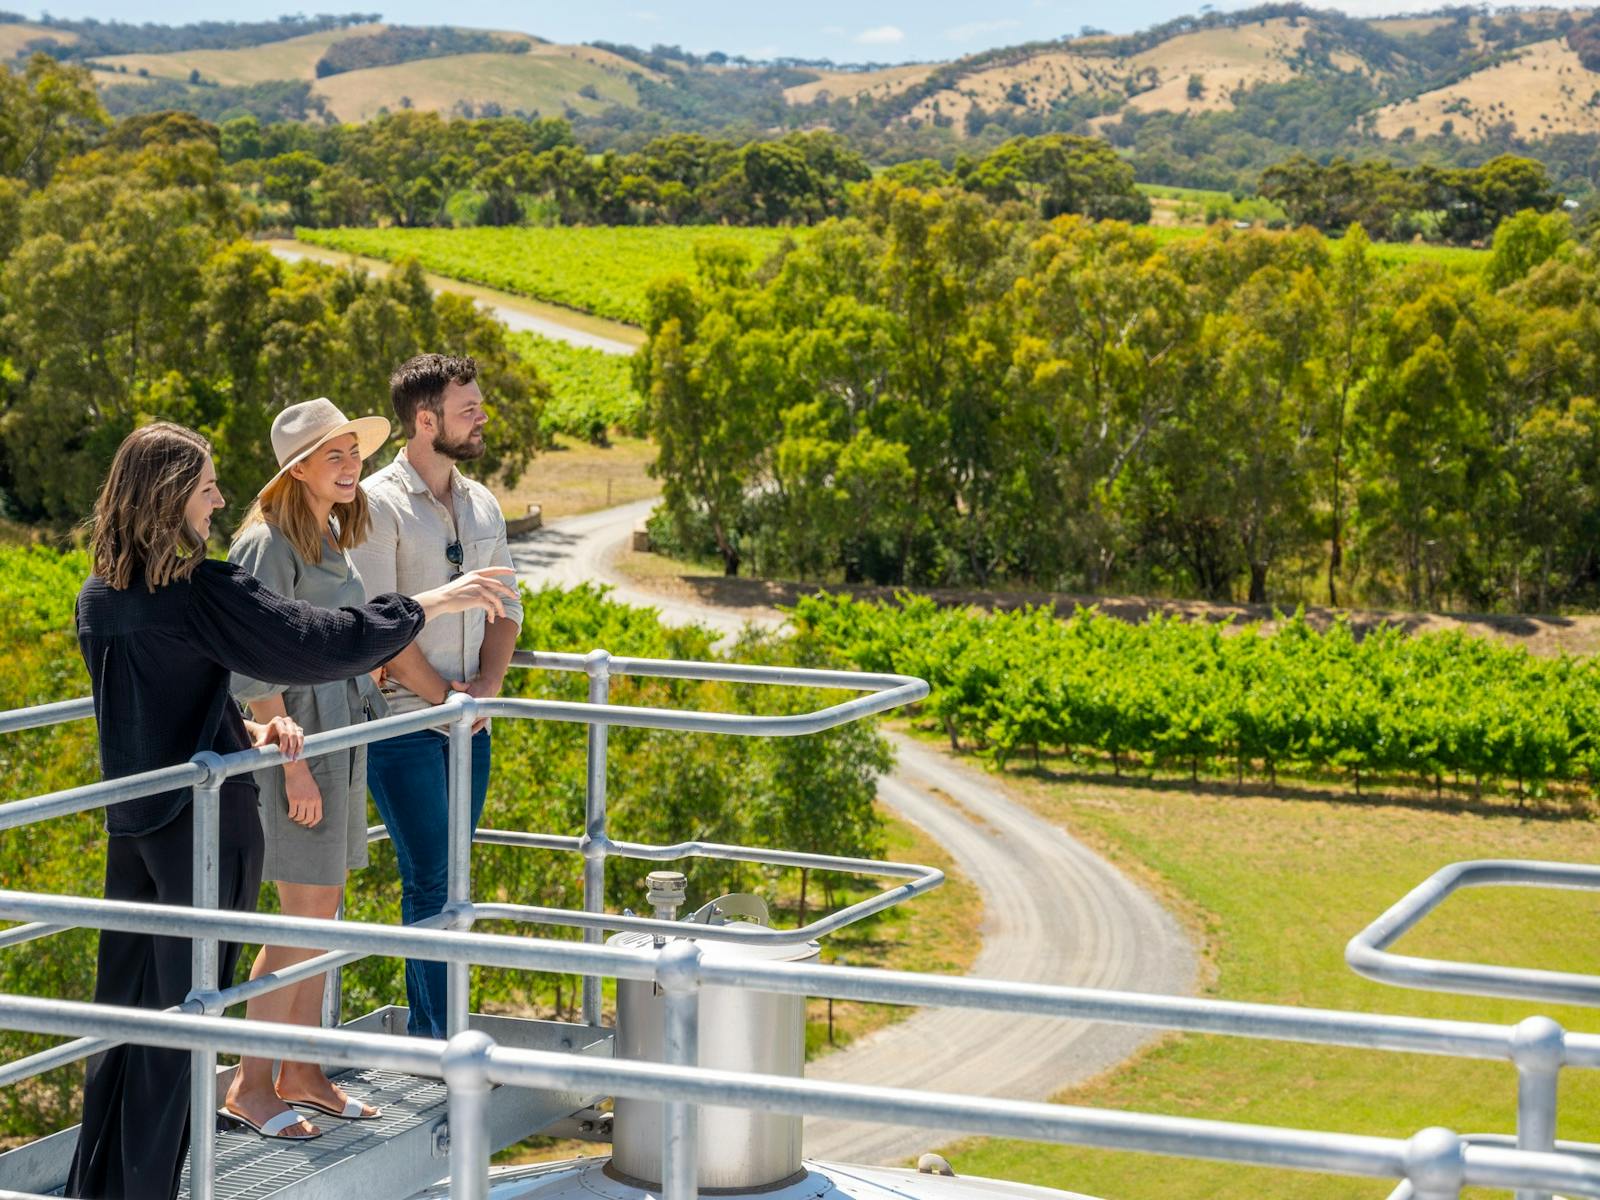 Views on our winery tours